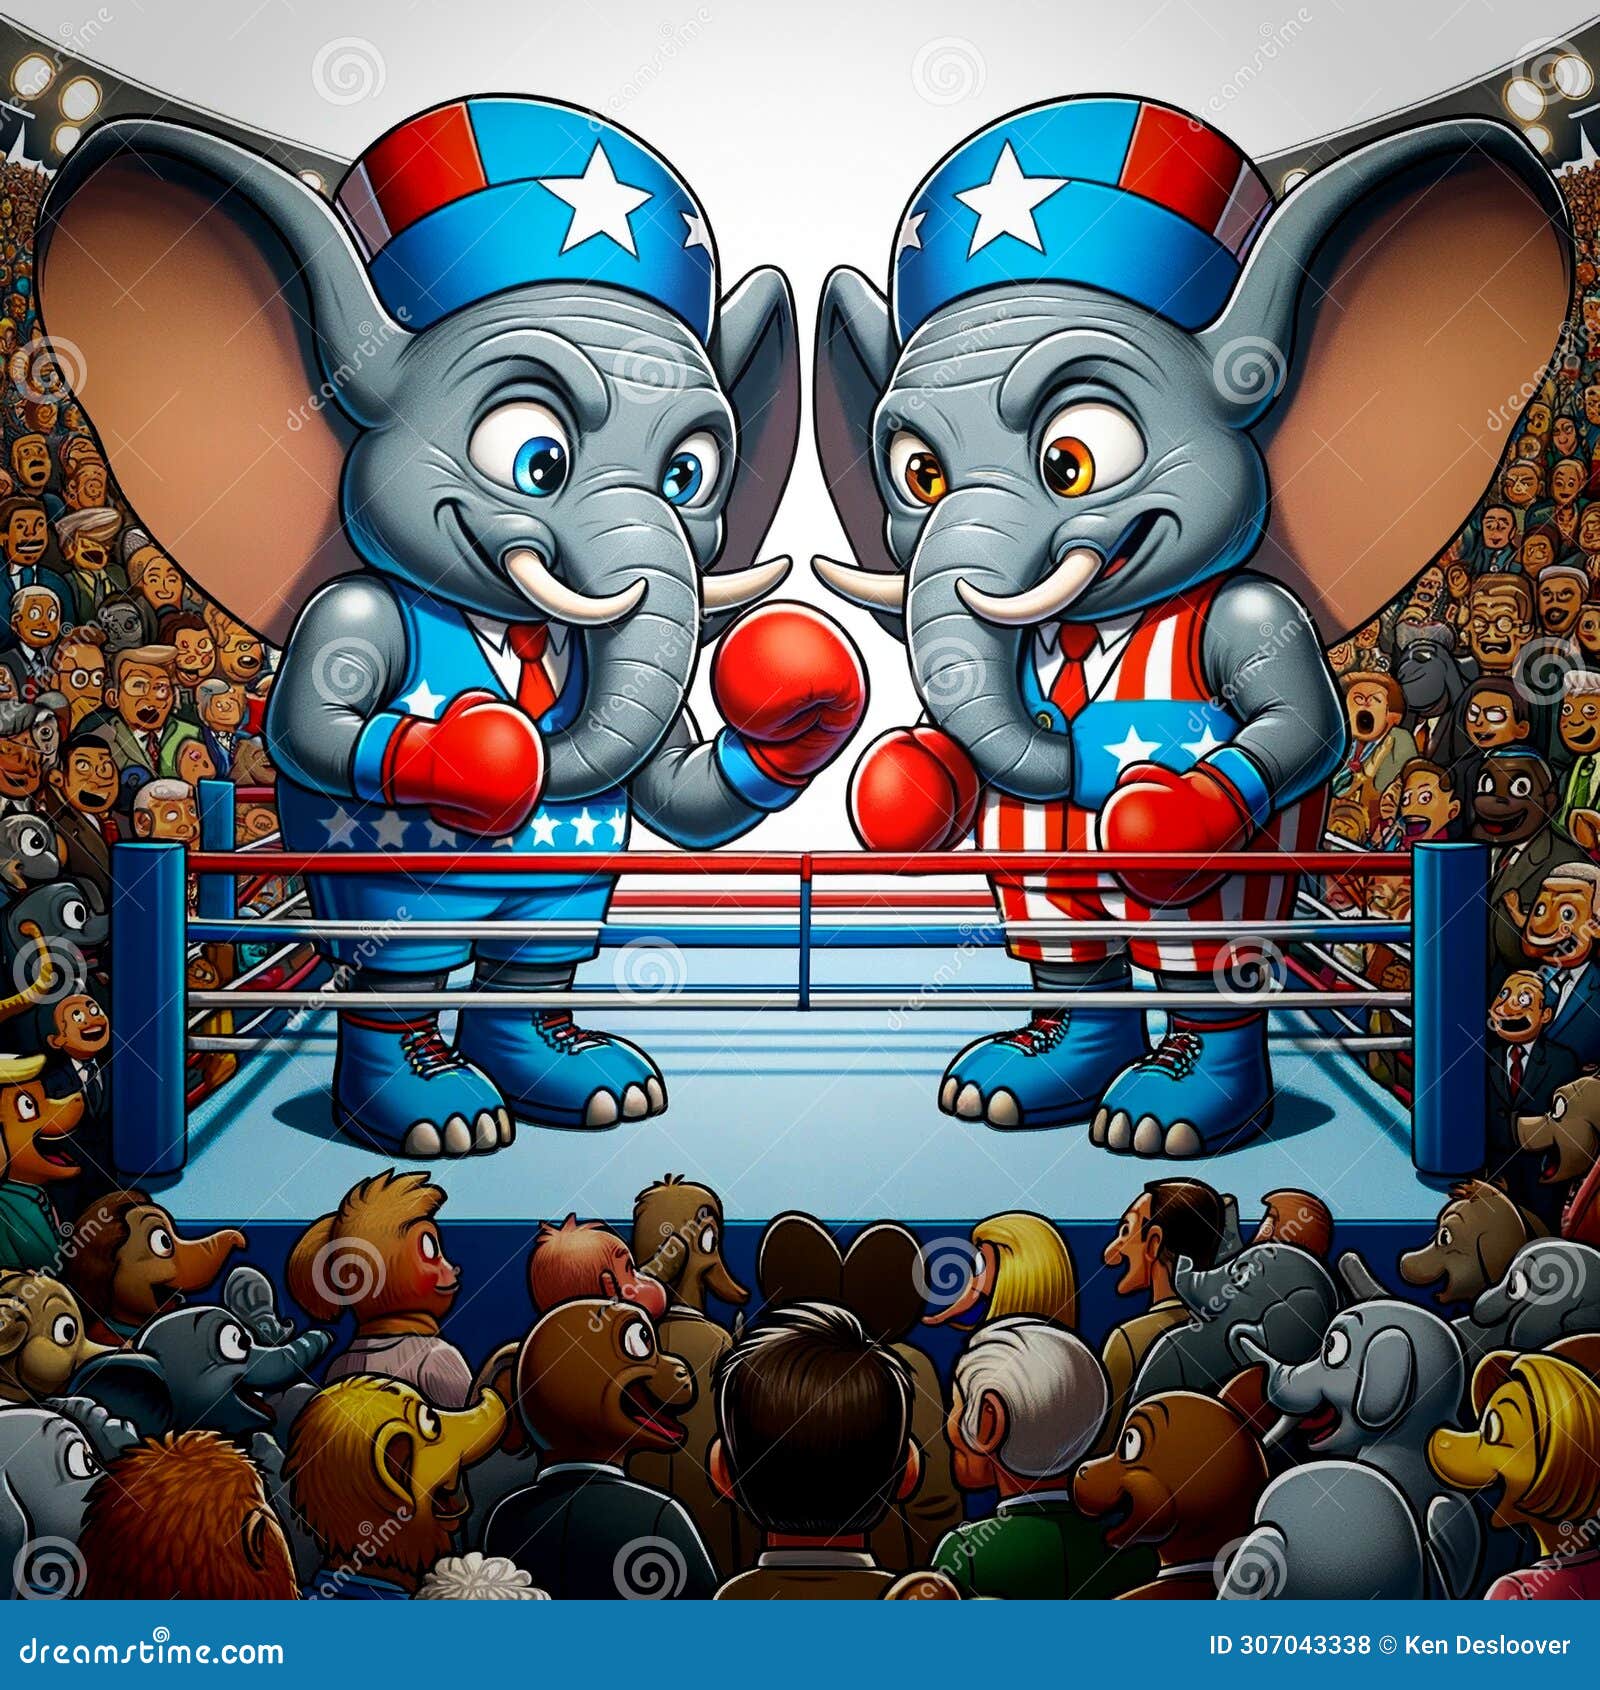 elephant mascots for the republican party facing off in battle for primary, caucus or policy issues in american politics